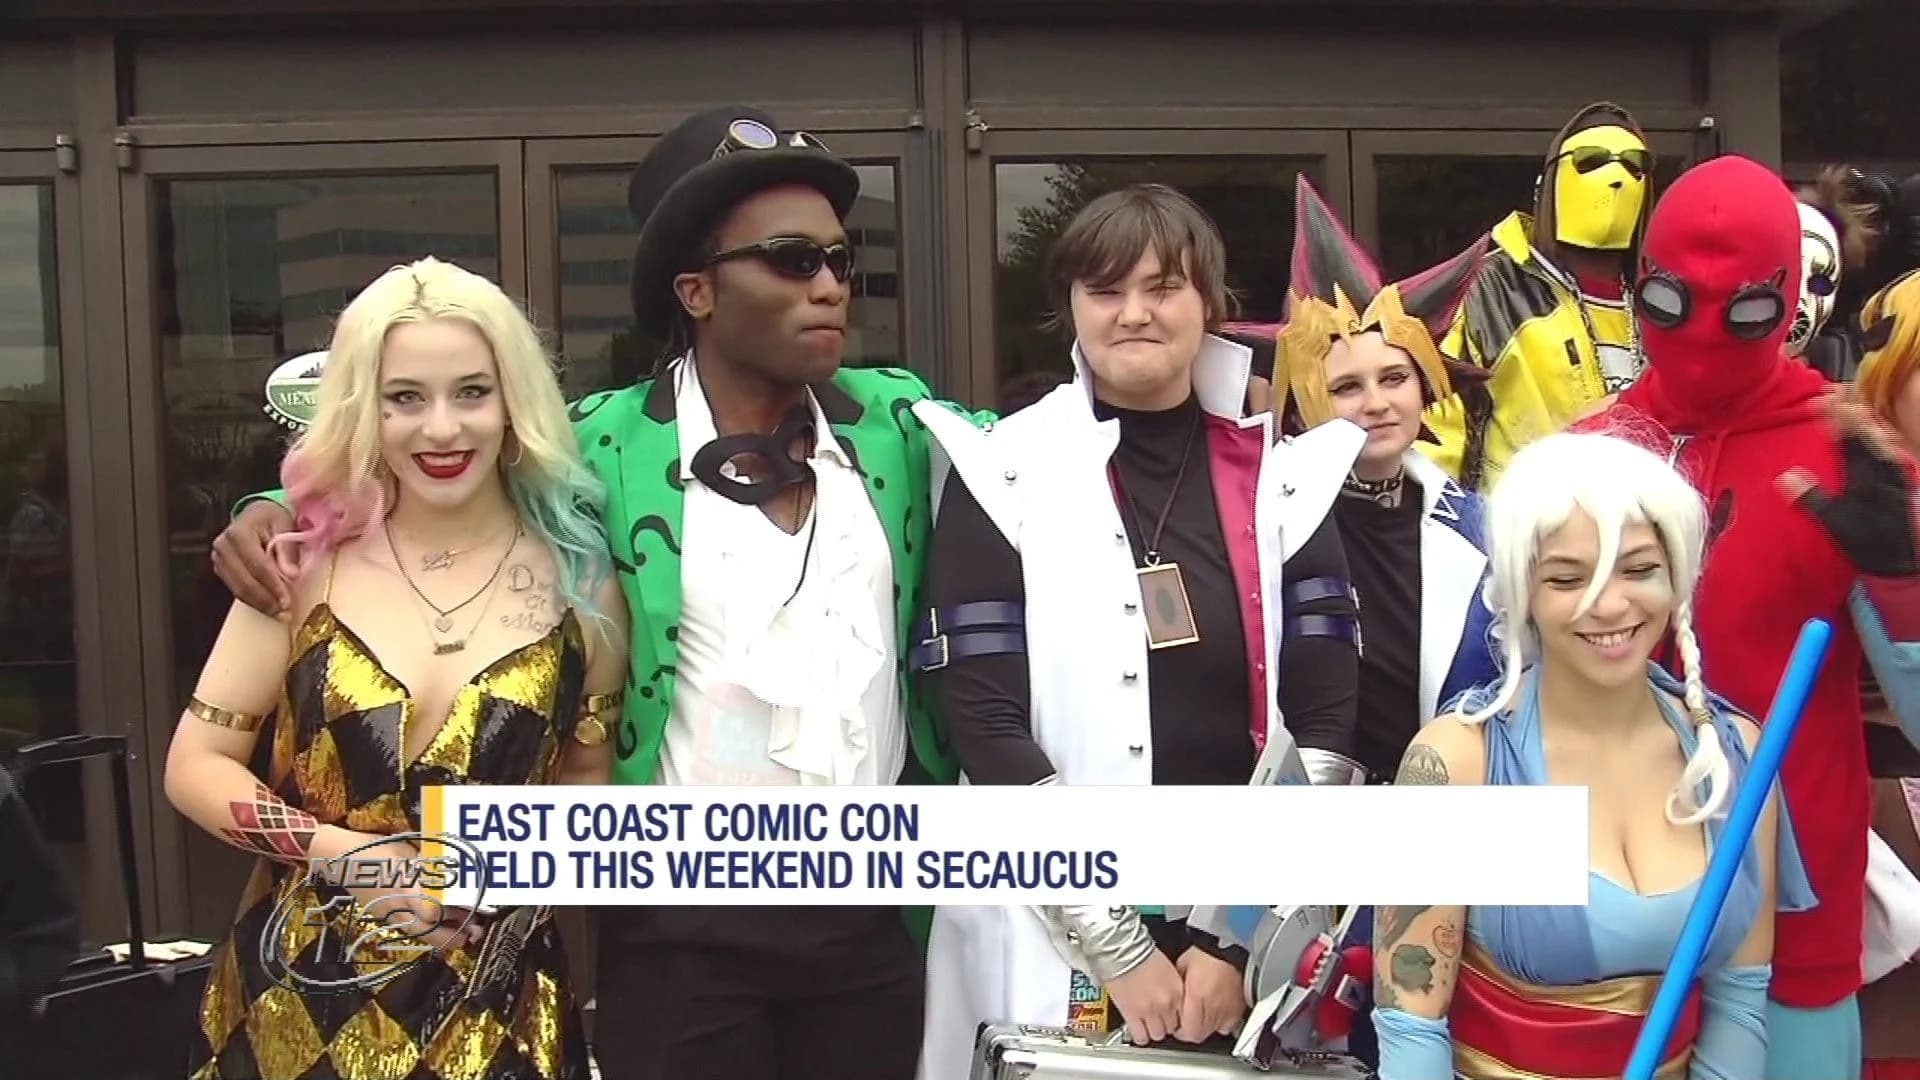 East Coast Comic Con draws fans to the Meadowlands